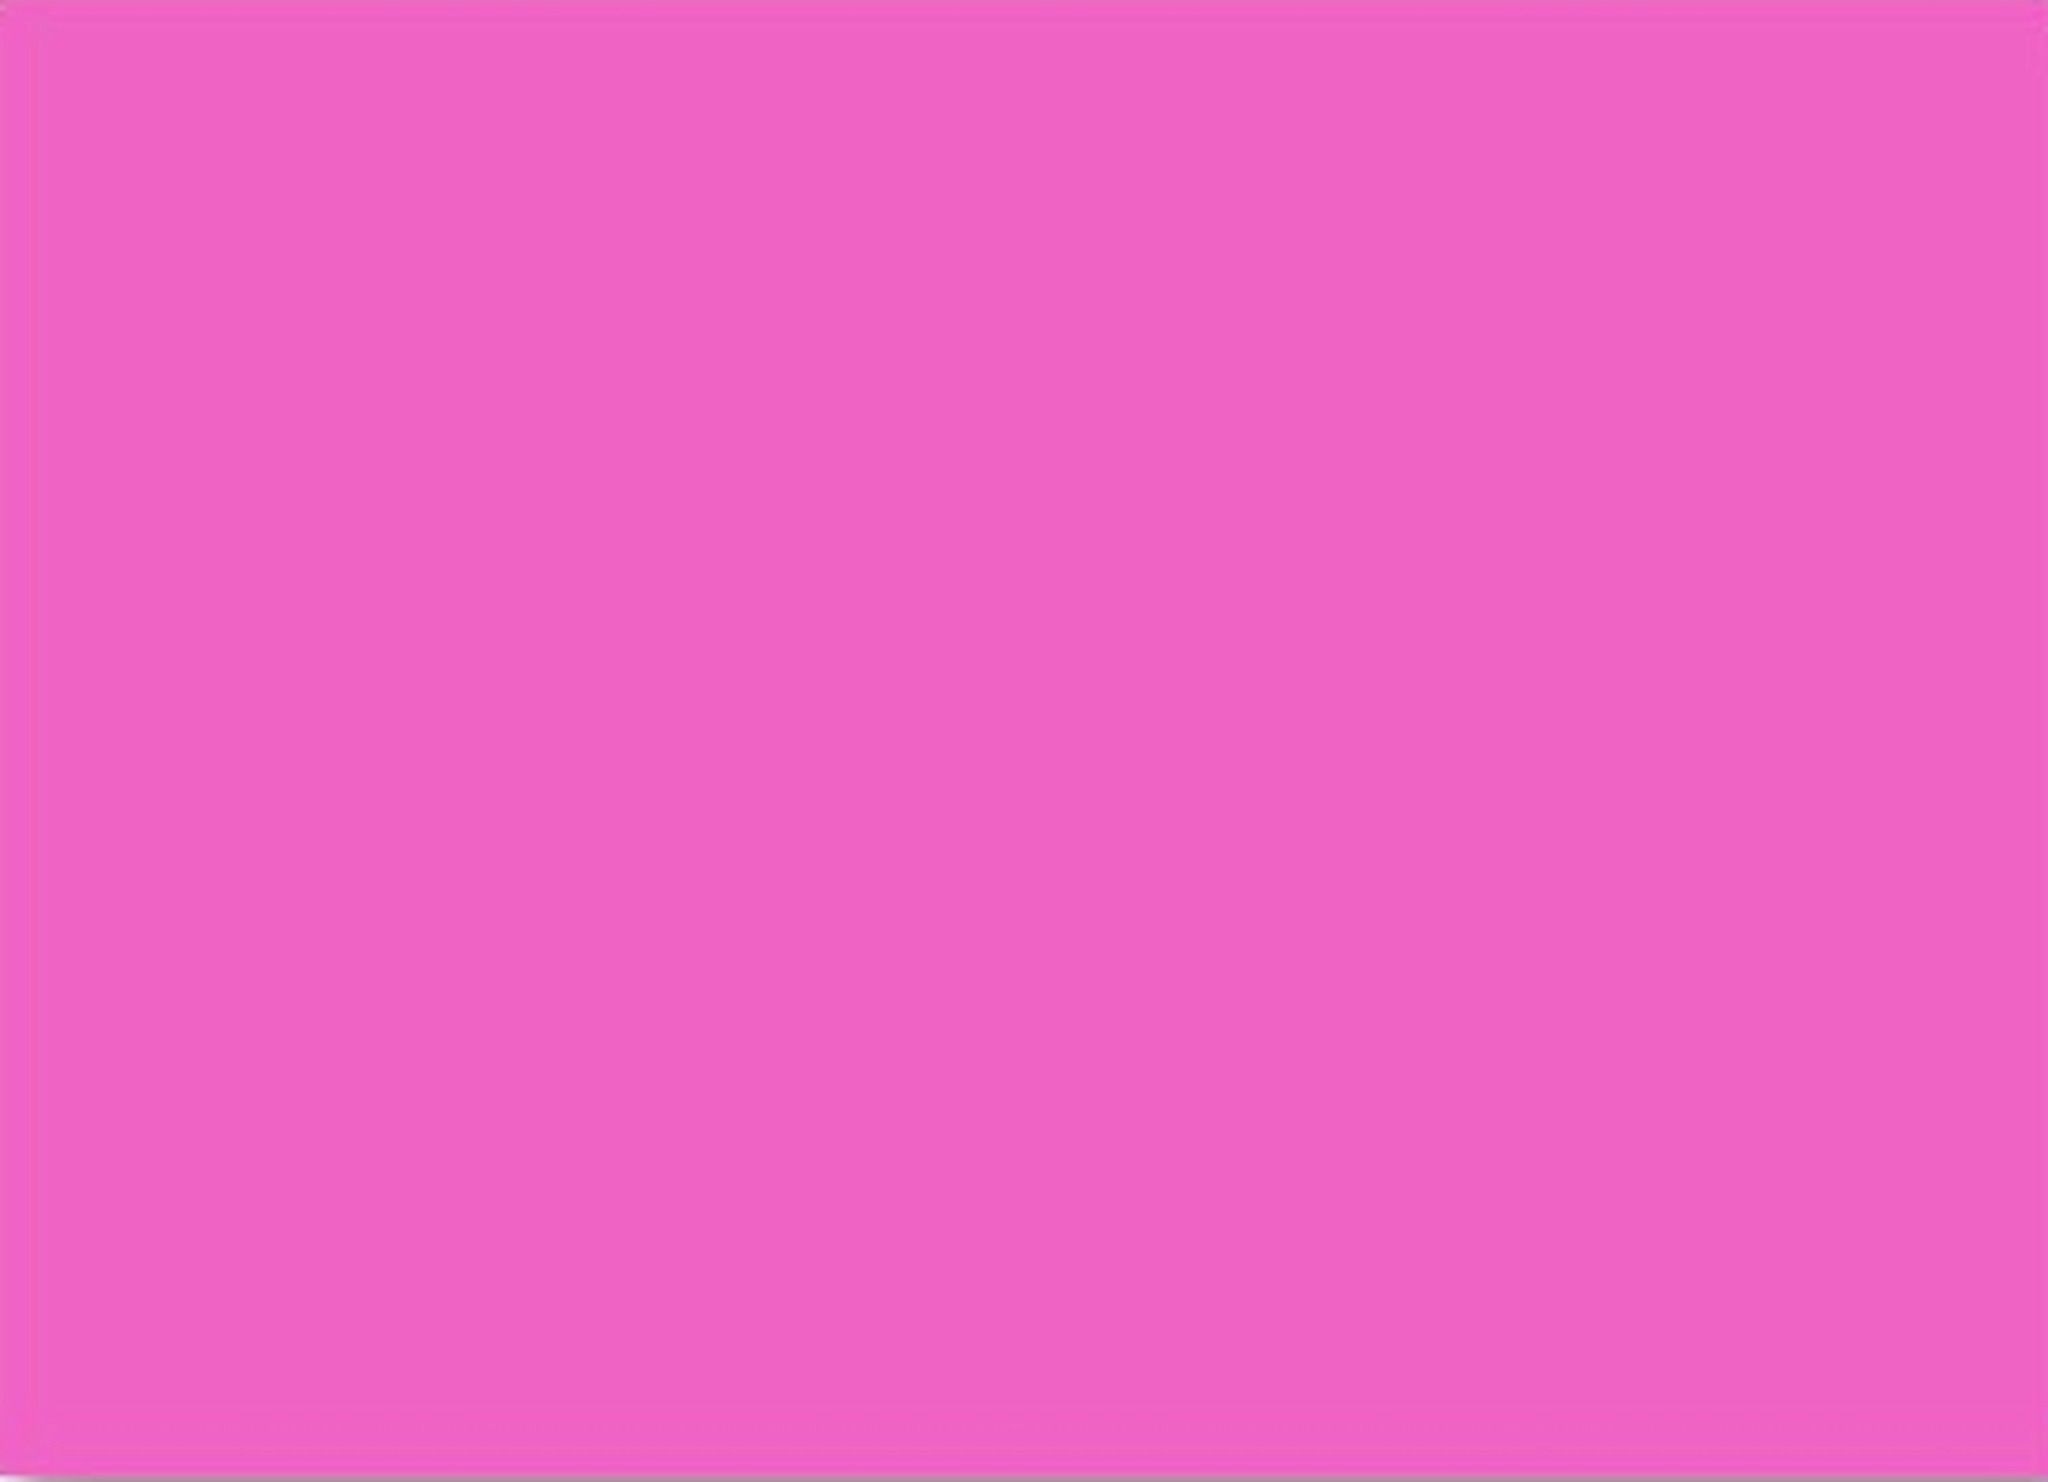 Free download Plain Neon Pink Background For plain neon pink